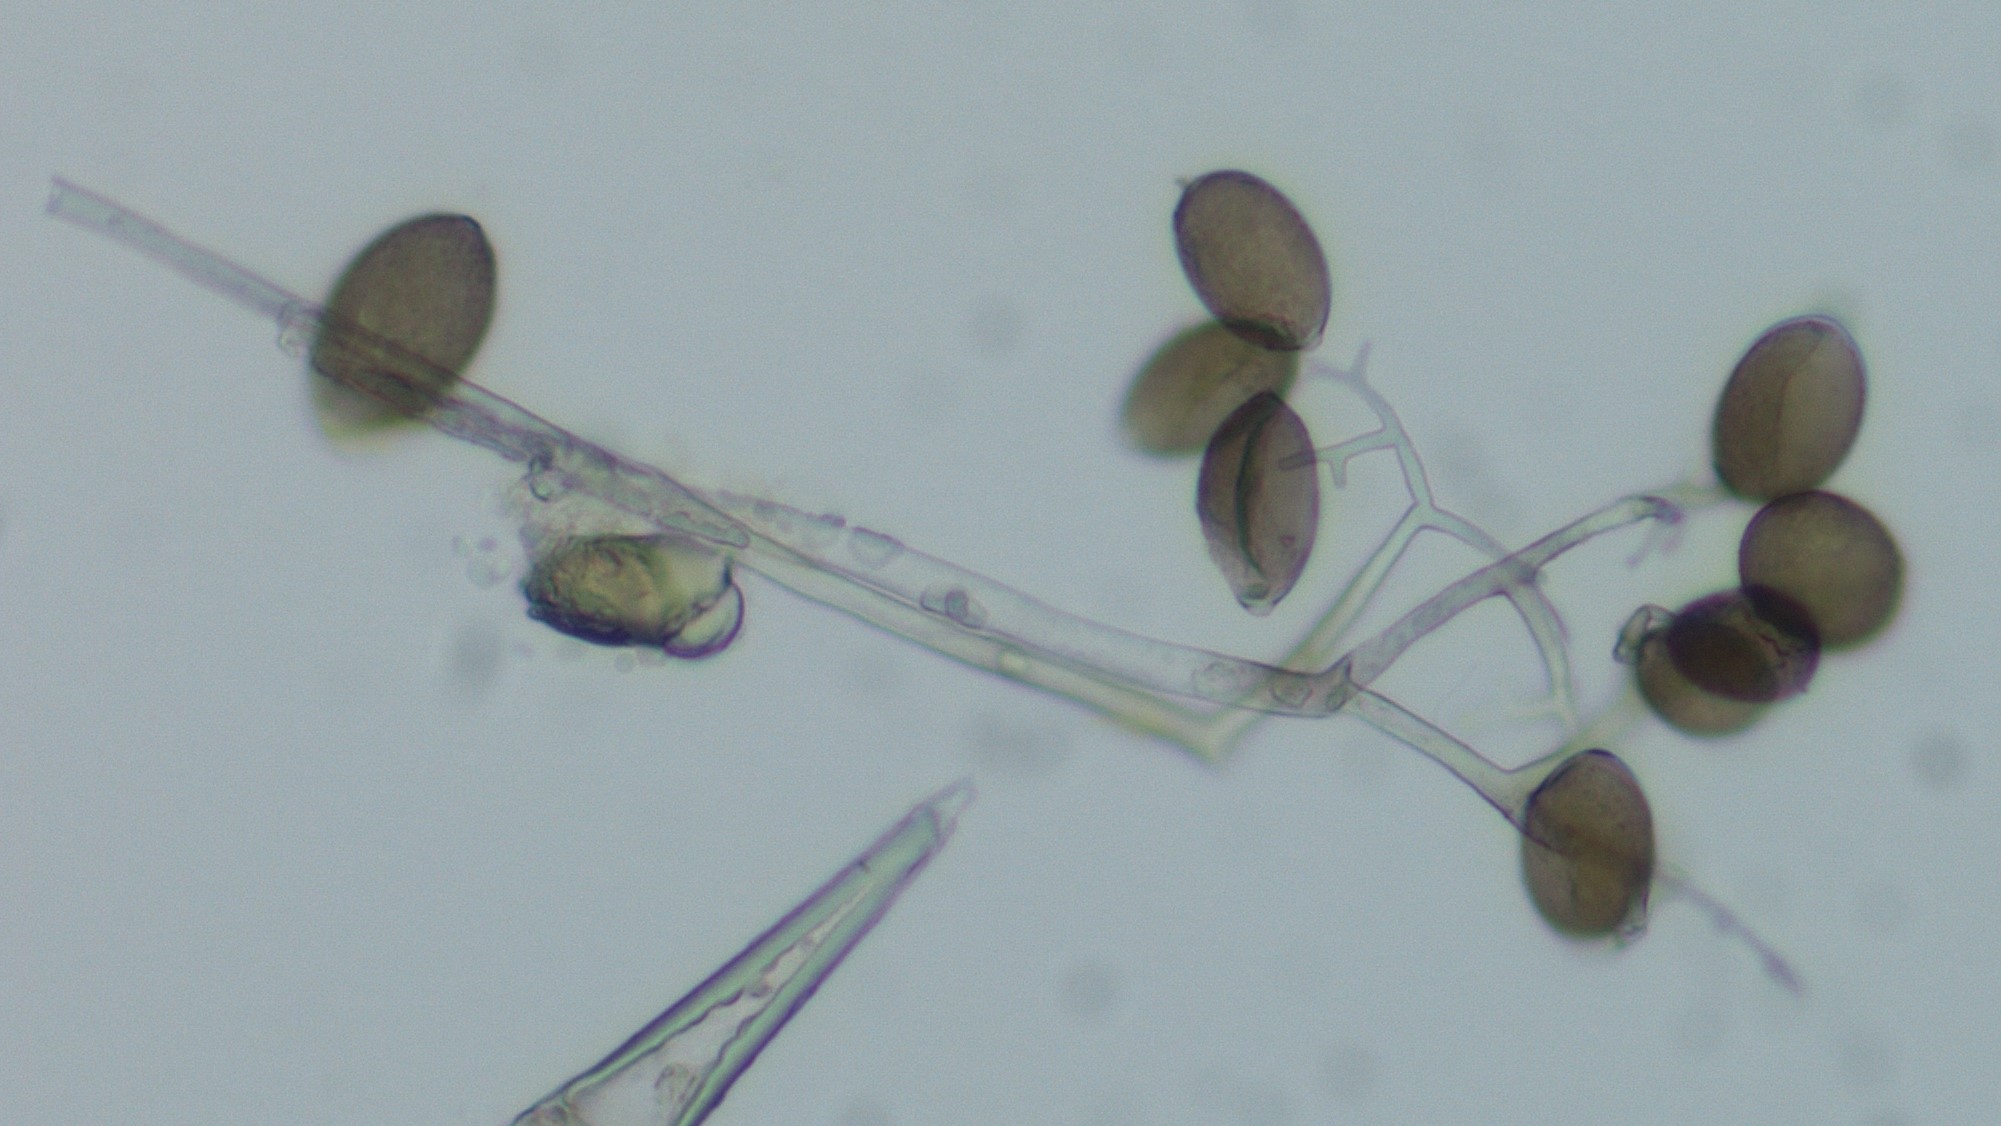 downy mildew spores magnified